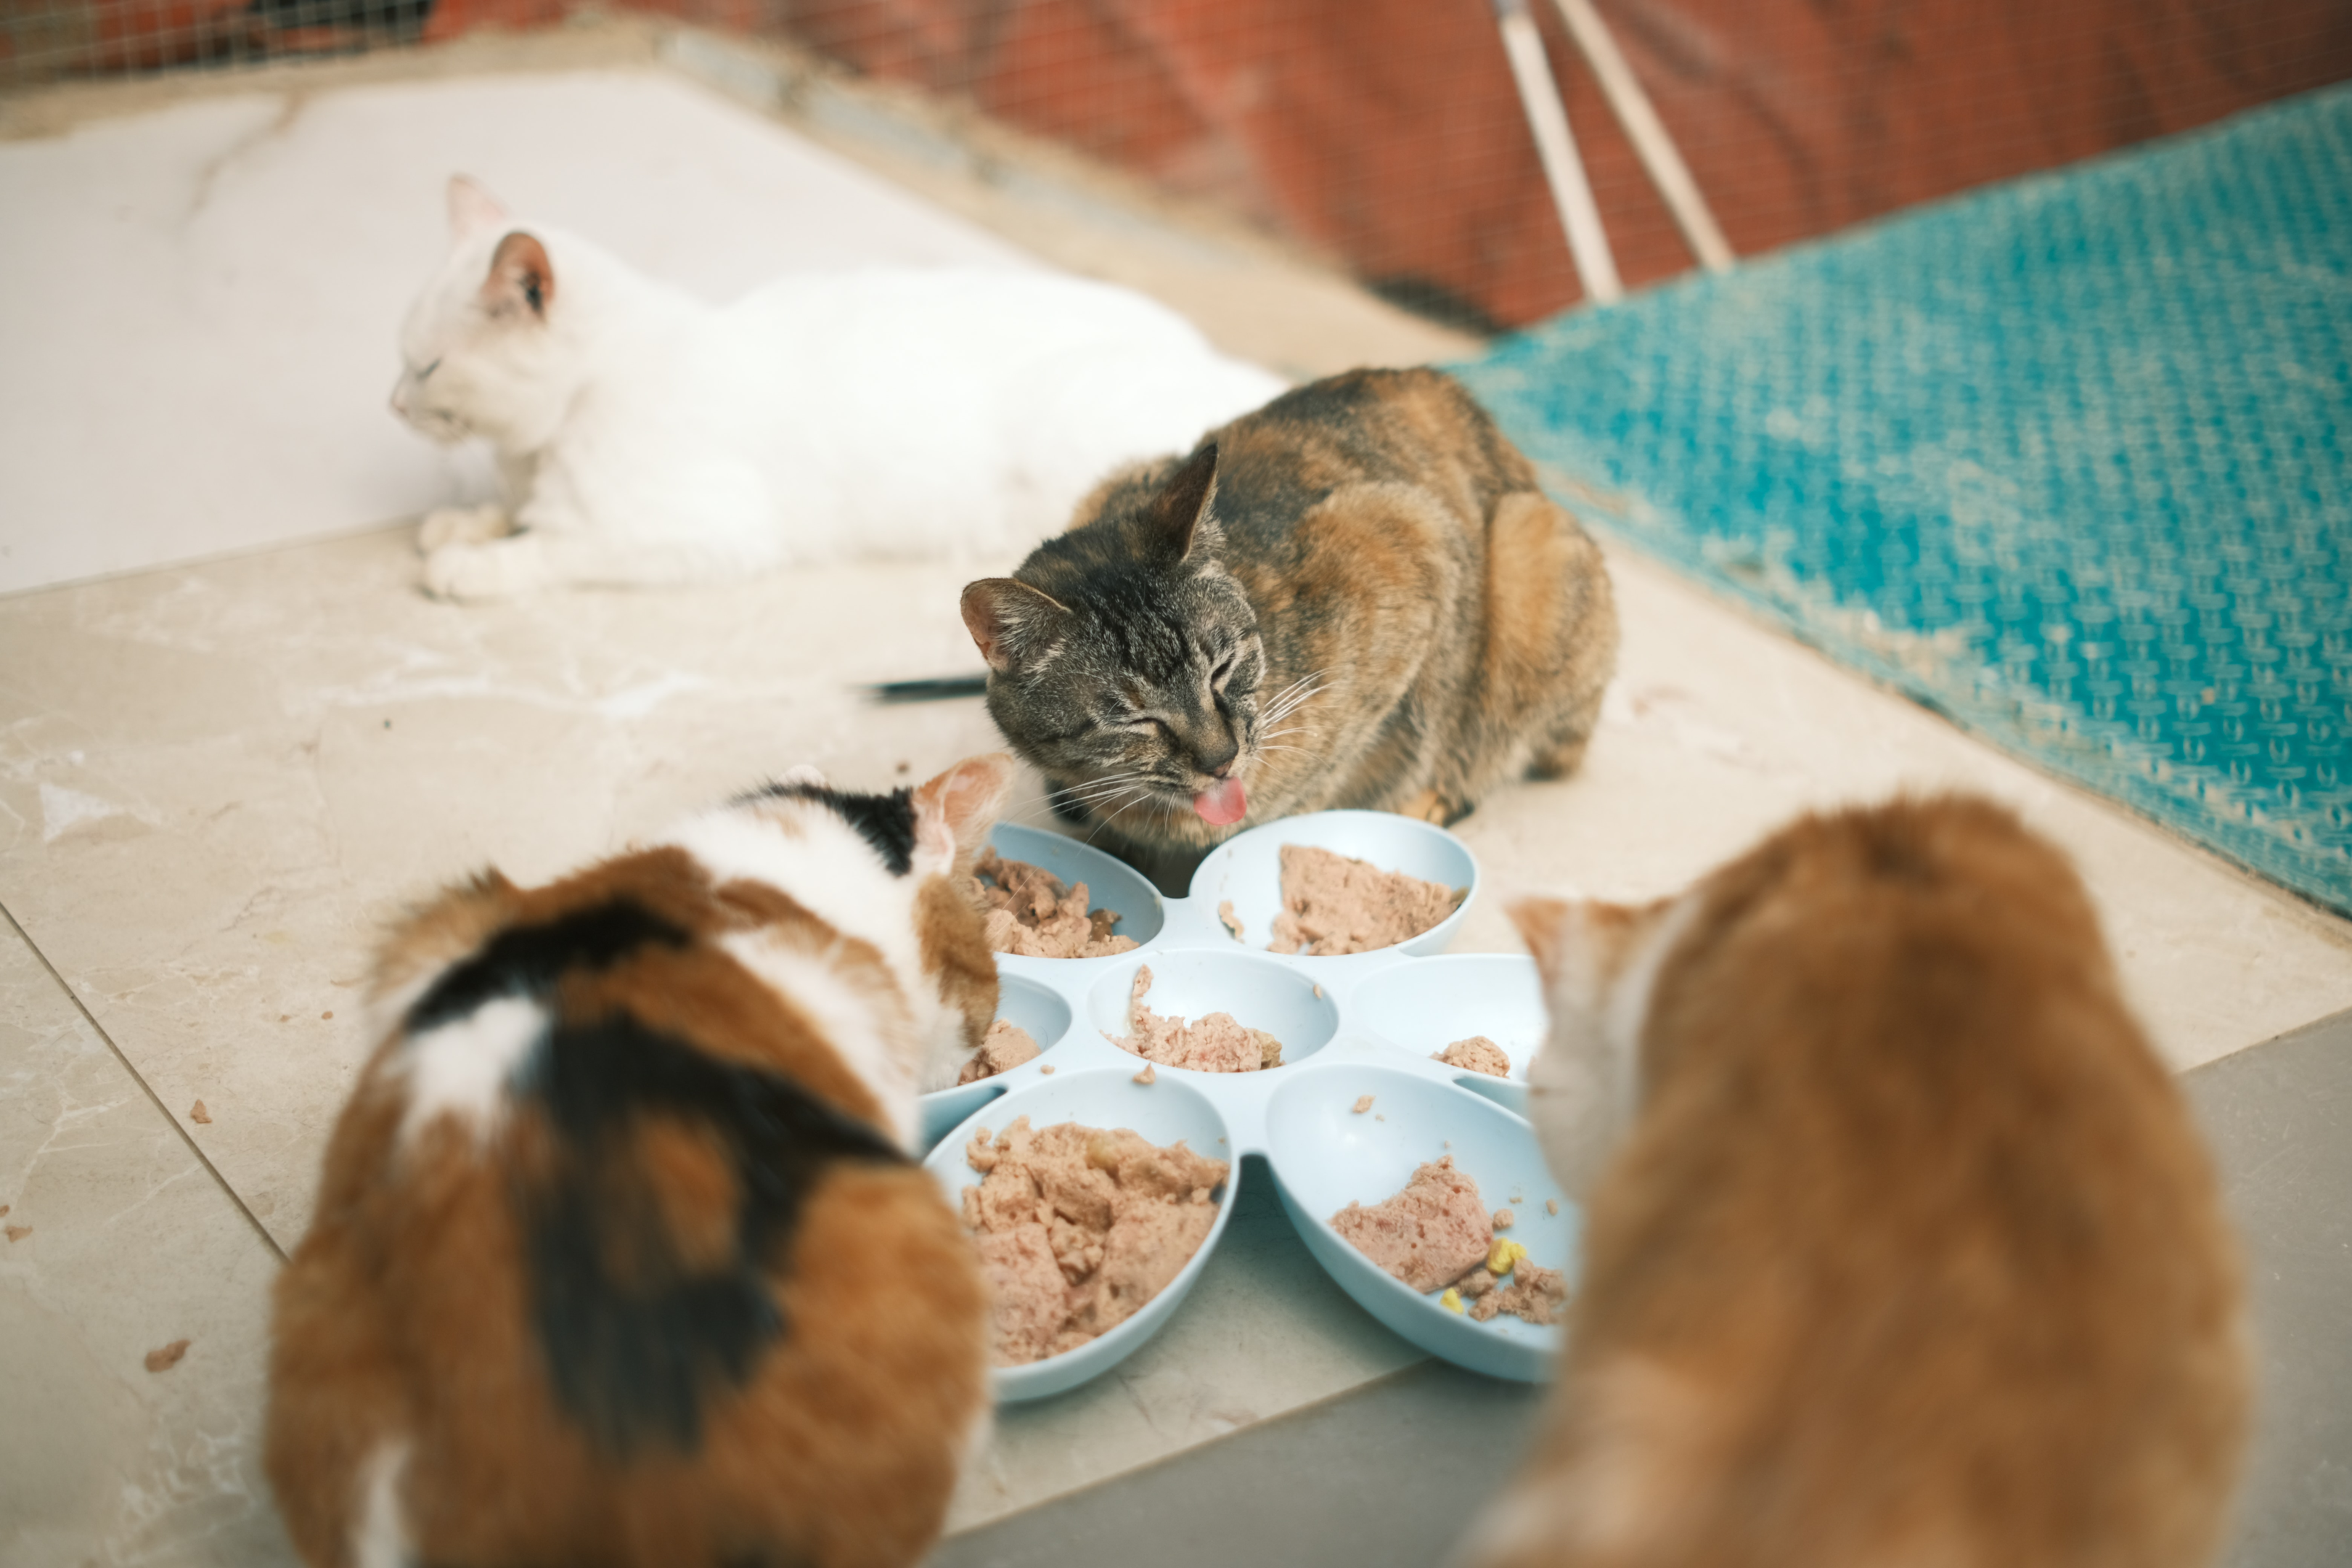 Source: https://www.pexels.com/photo/close-up-of-cats-eating-16465621/